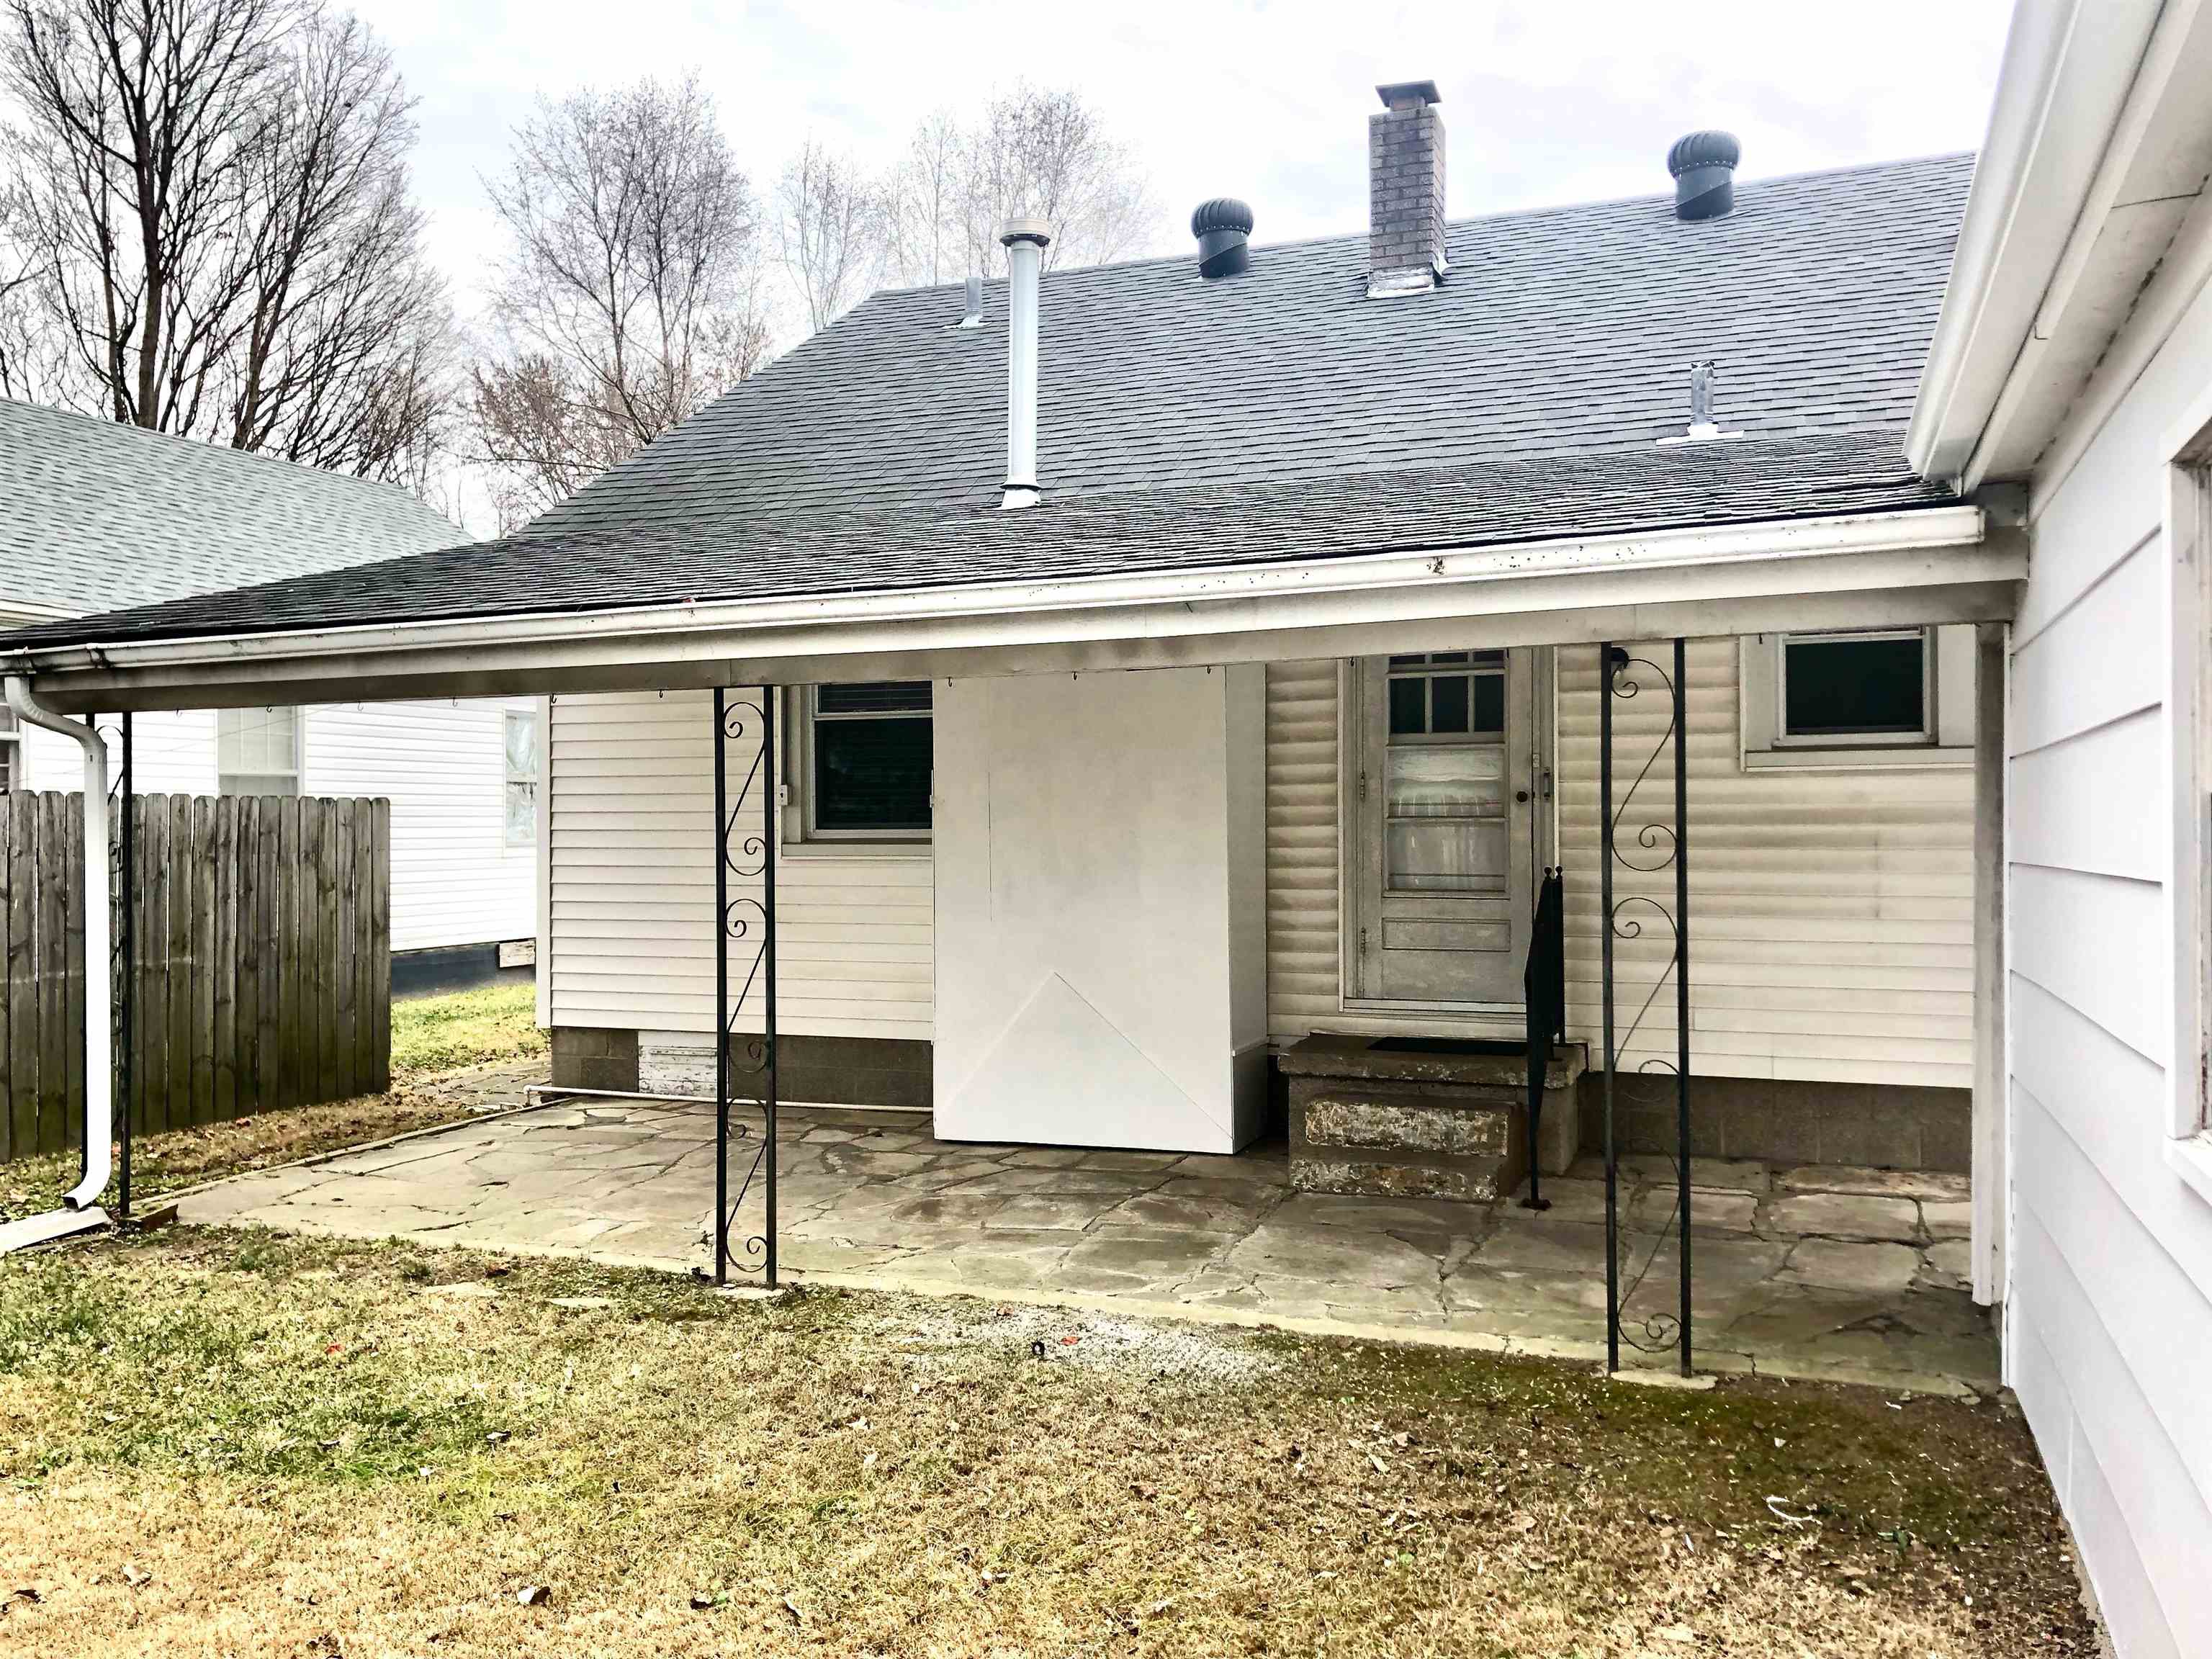 507 E 25th St., Owensboro, Kentucky 42303, 2 Bedrooms Bedrooms, ,1 BathroomBathrooms,Single Family Residence,For Sale,E 25th St.,88628